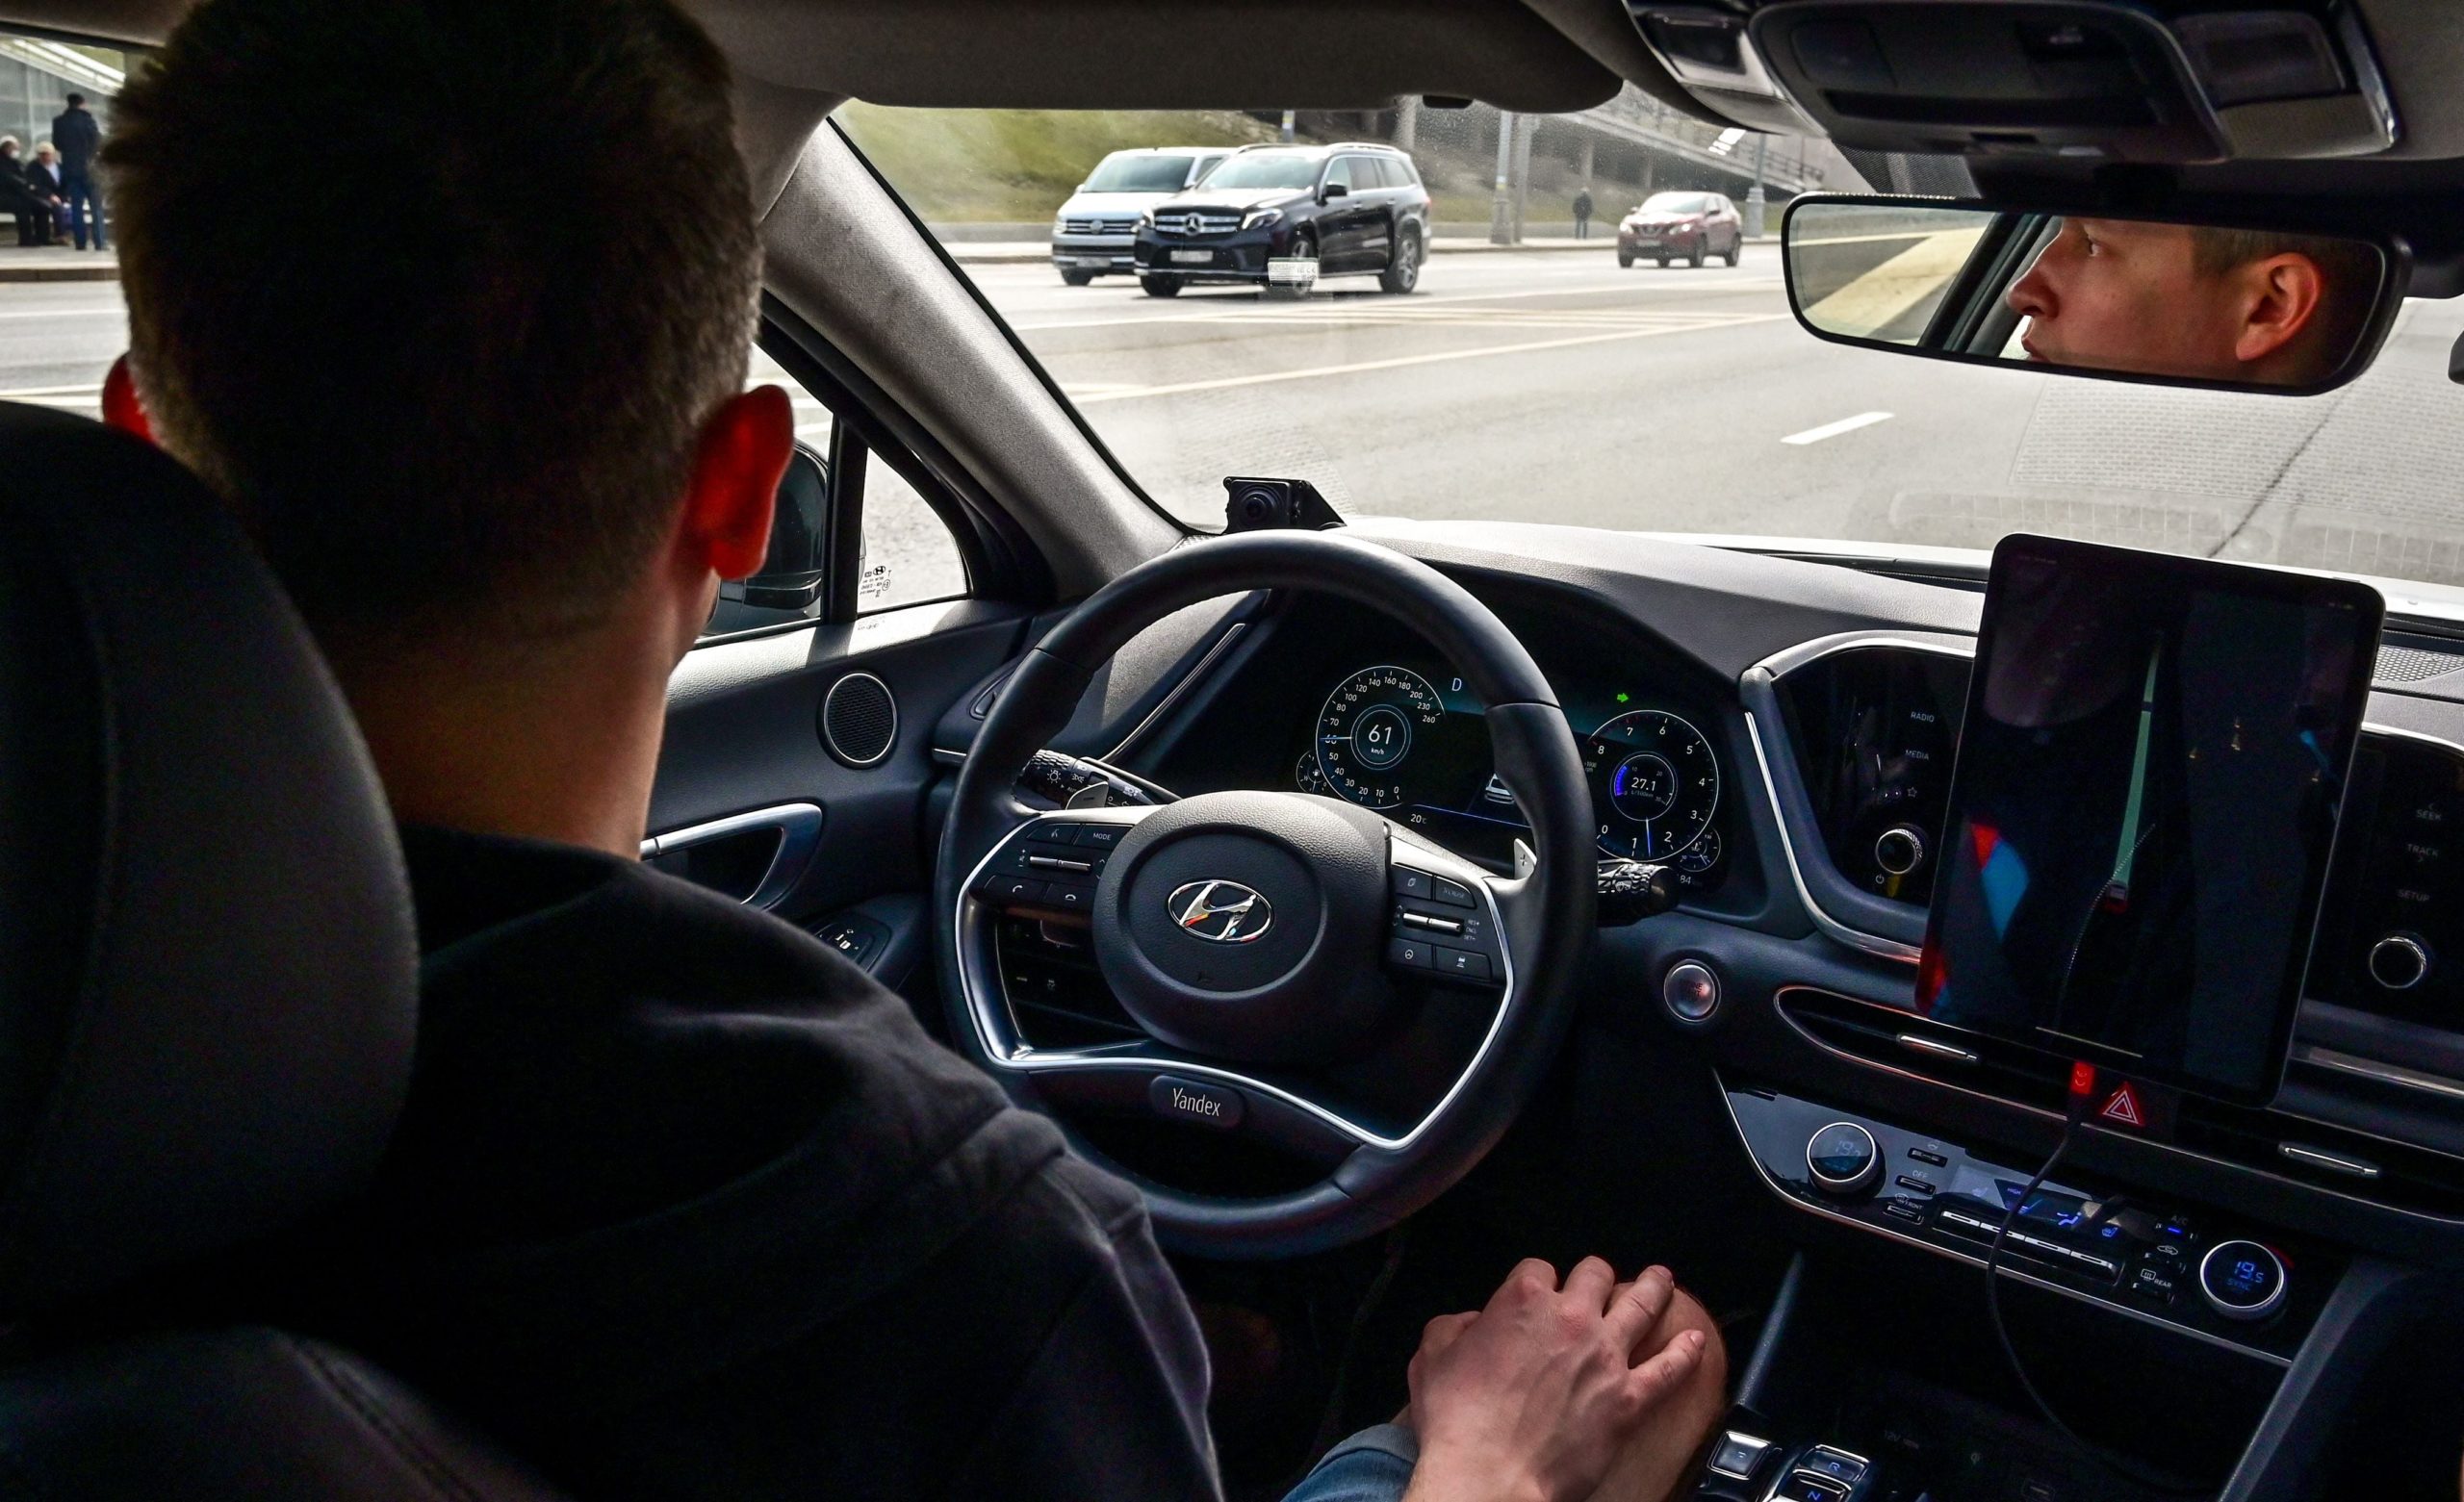 Steering Wheel Sensors Won’t Save Us From Distracted Drivers